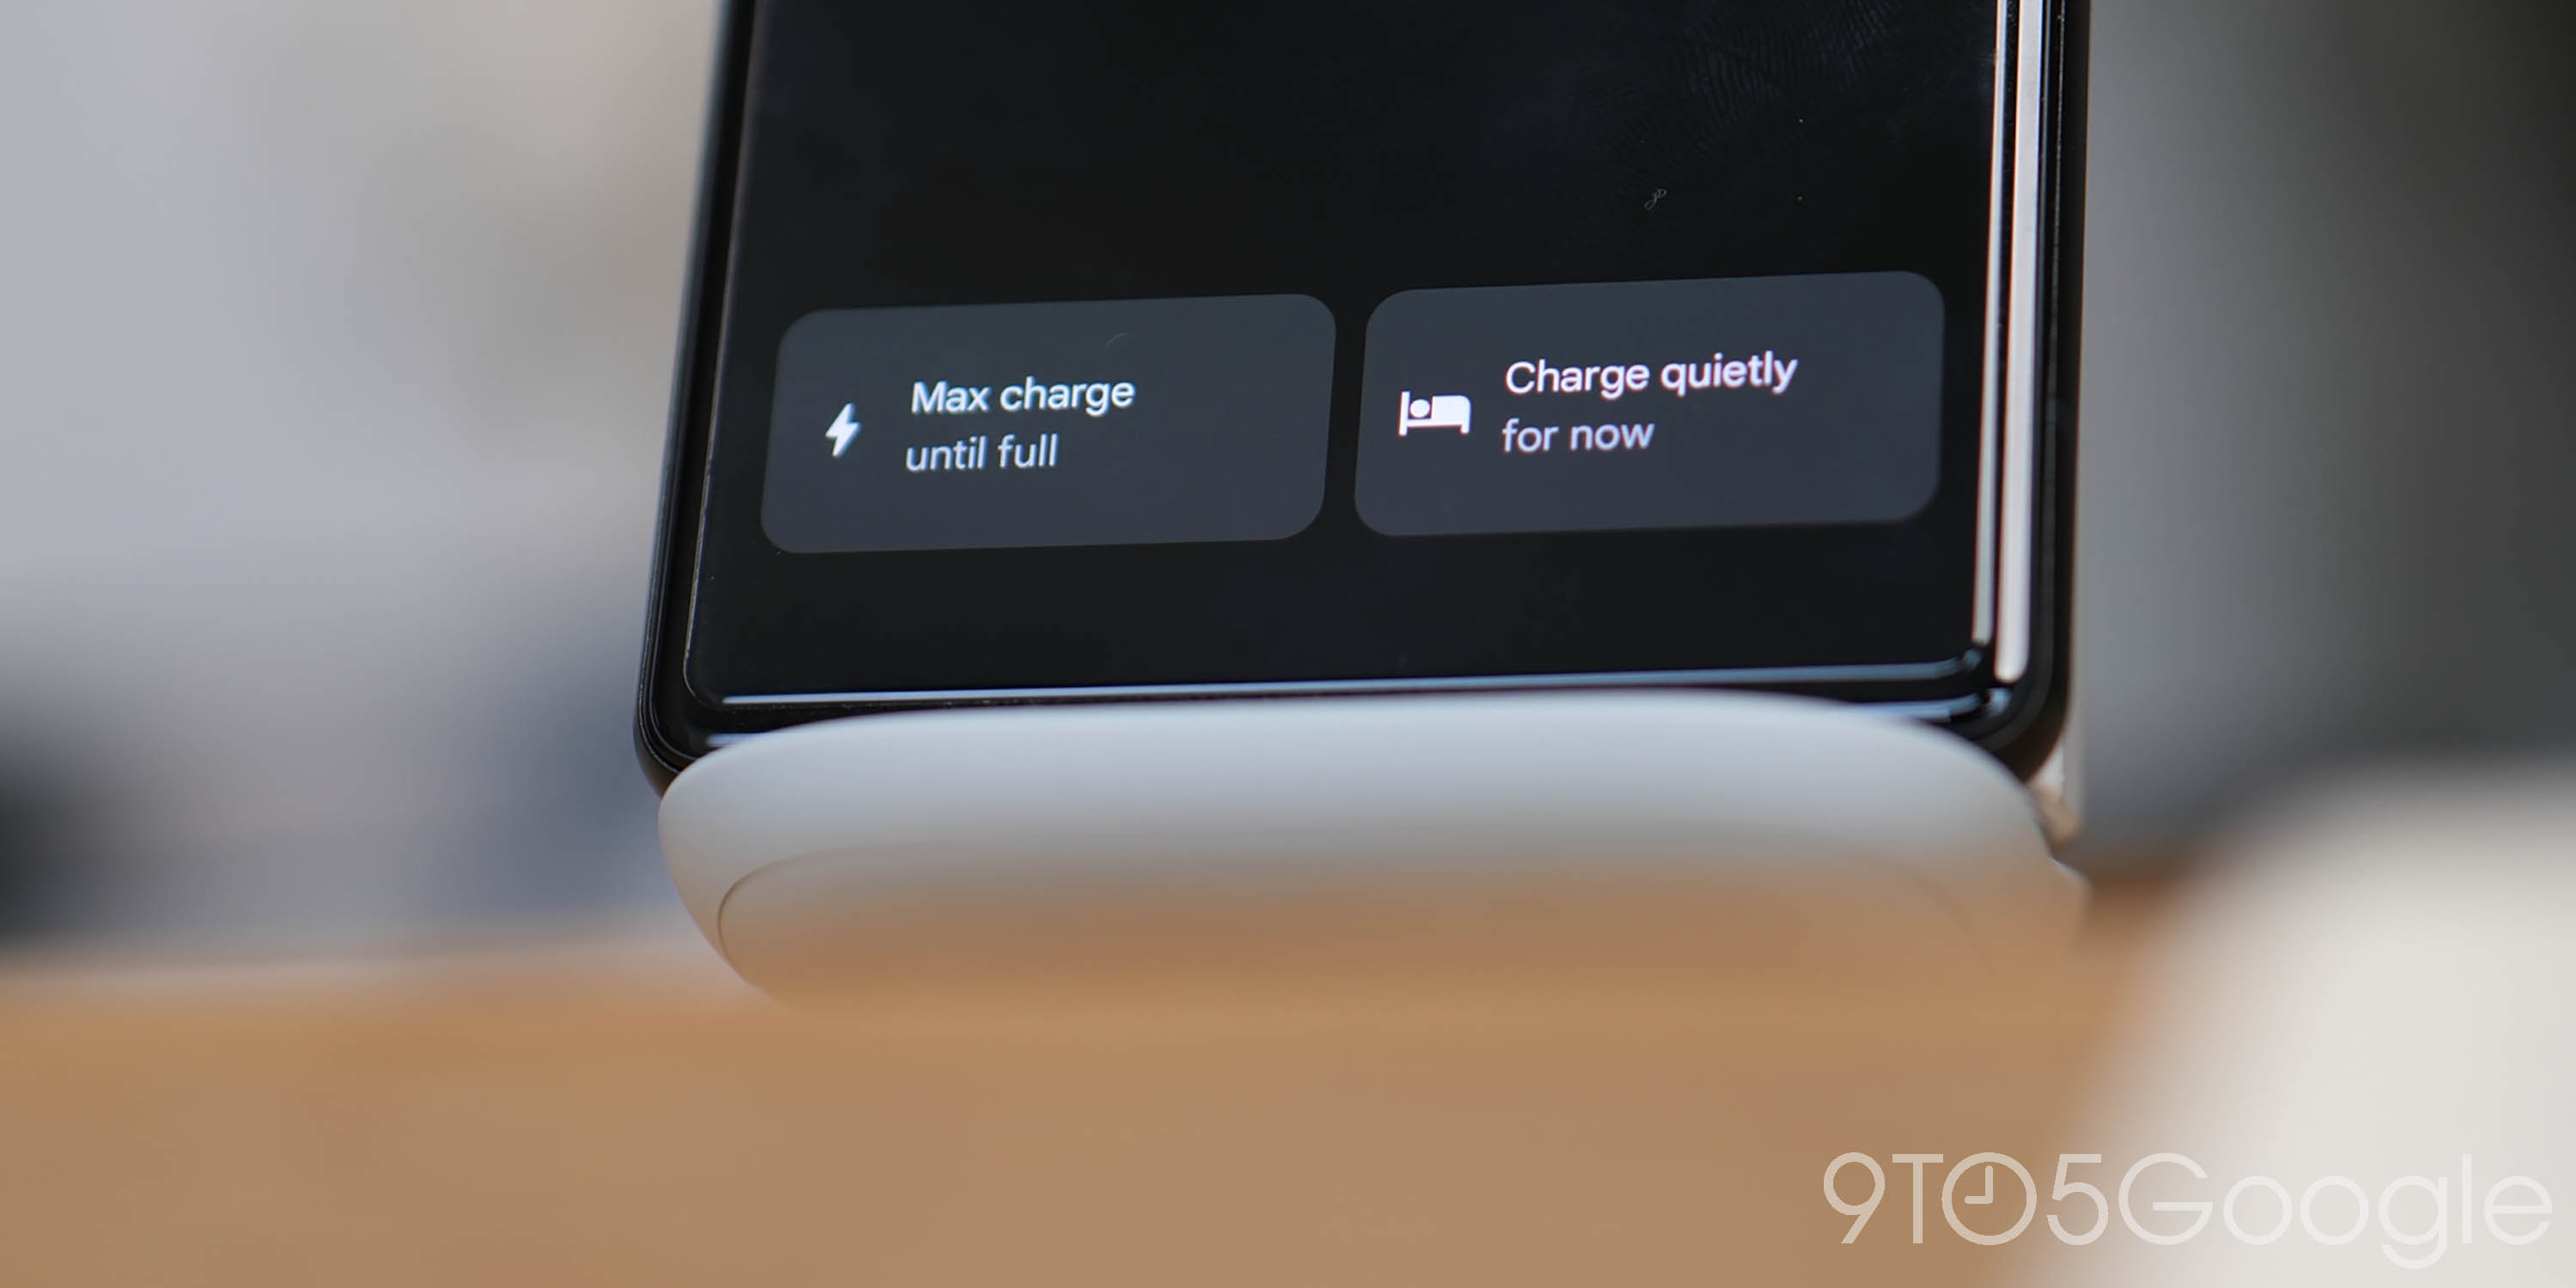 Pixel Stand 2nd Gen charging speed toggles